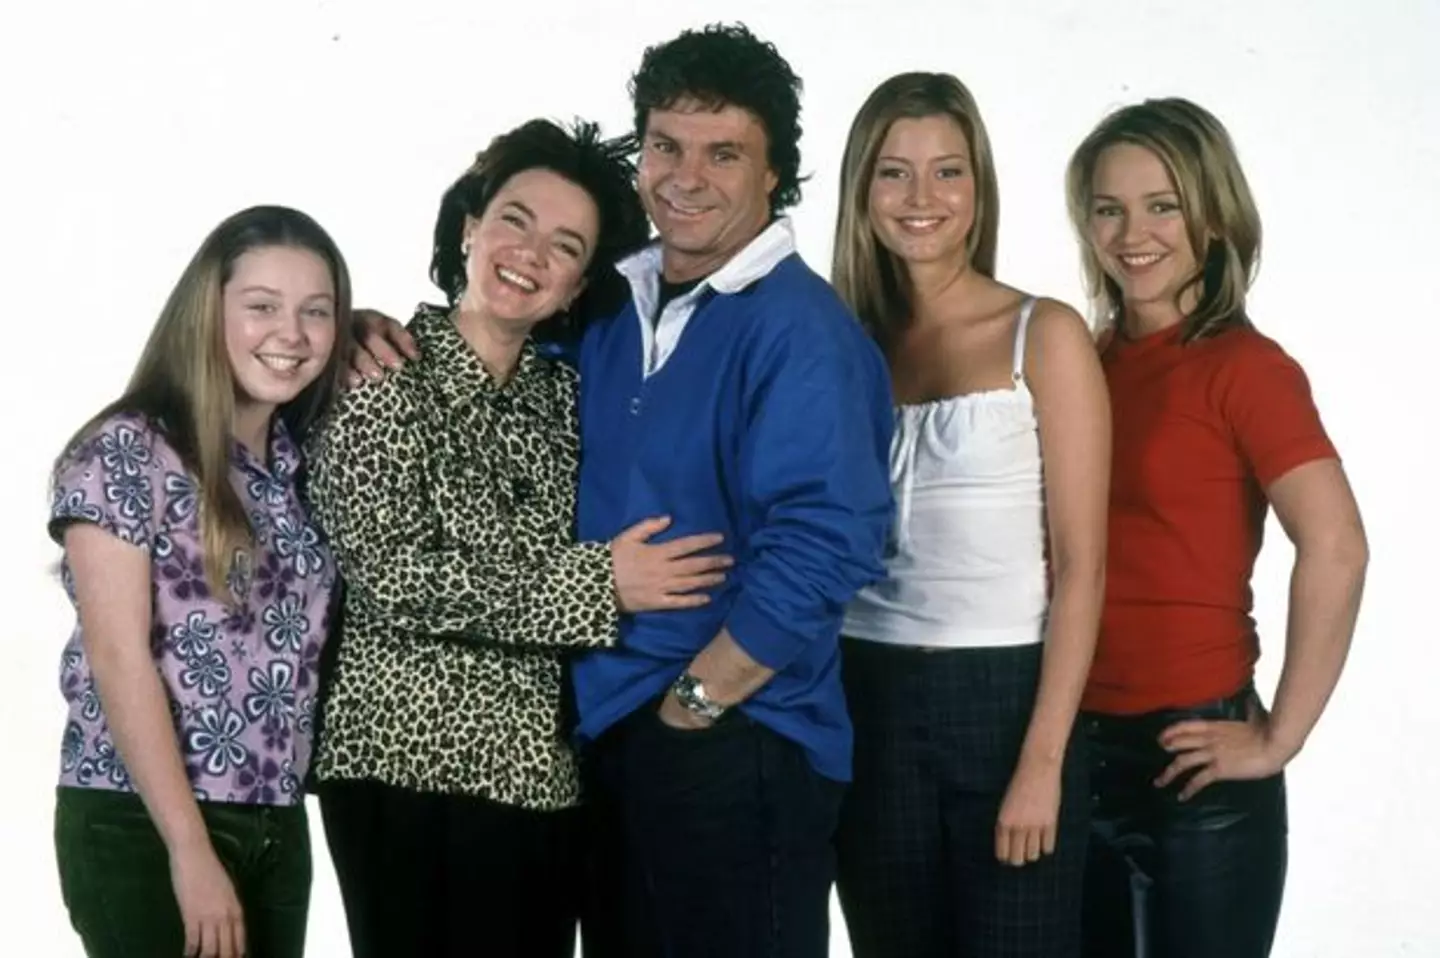 Kate is on the far right as Michelle Scully, next to mum Lyn (played by Janet Andrewartha), dad Joe (Shane Connor) and sisters Felicity (Holly Candy) and Stephanie (Carla Bonner).